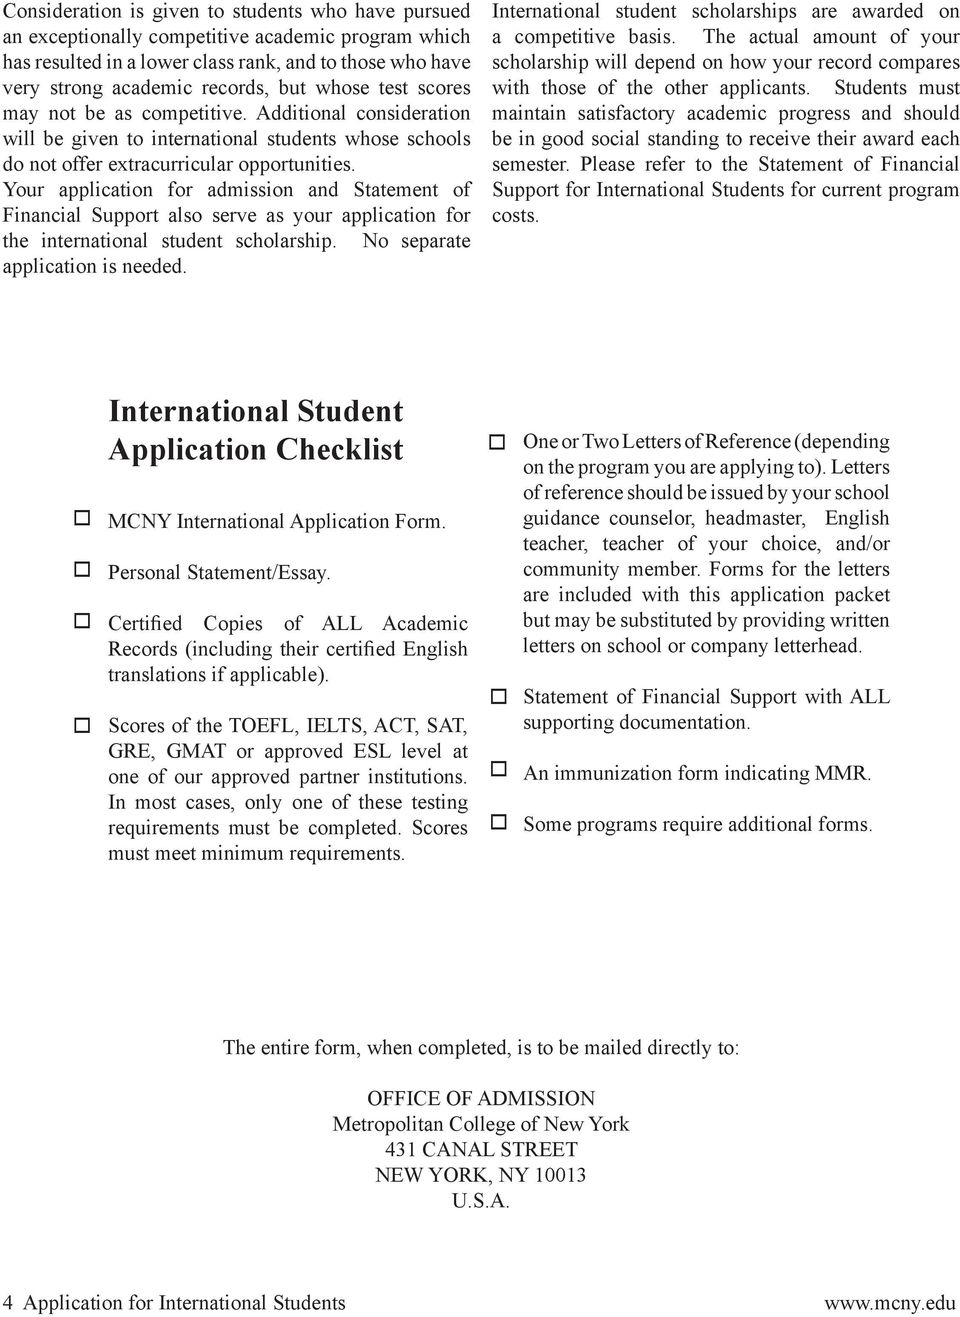 Your application for admission and Statement of Financial Support also serve as your application for the international student scholarship. No separate application is needed.